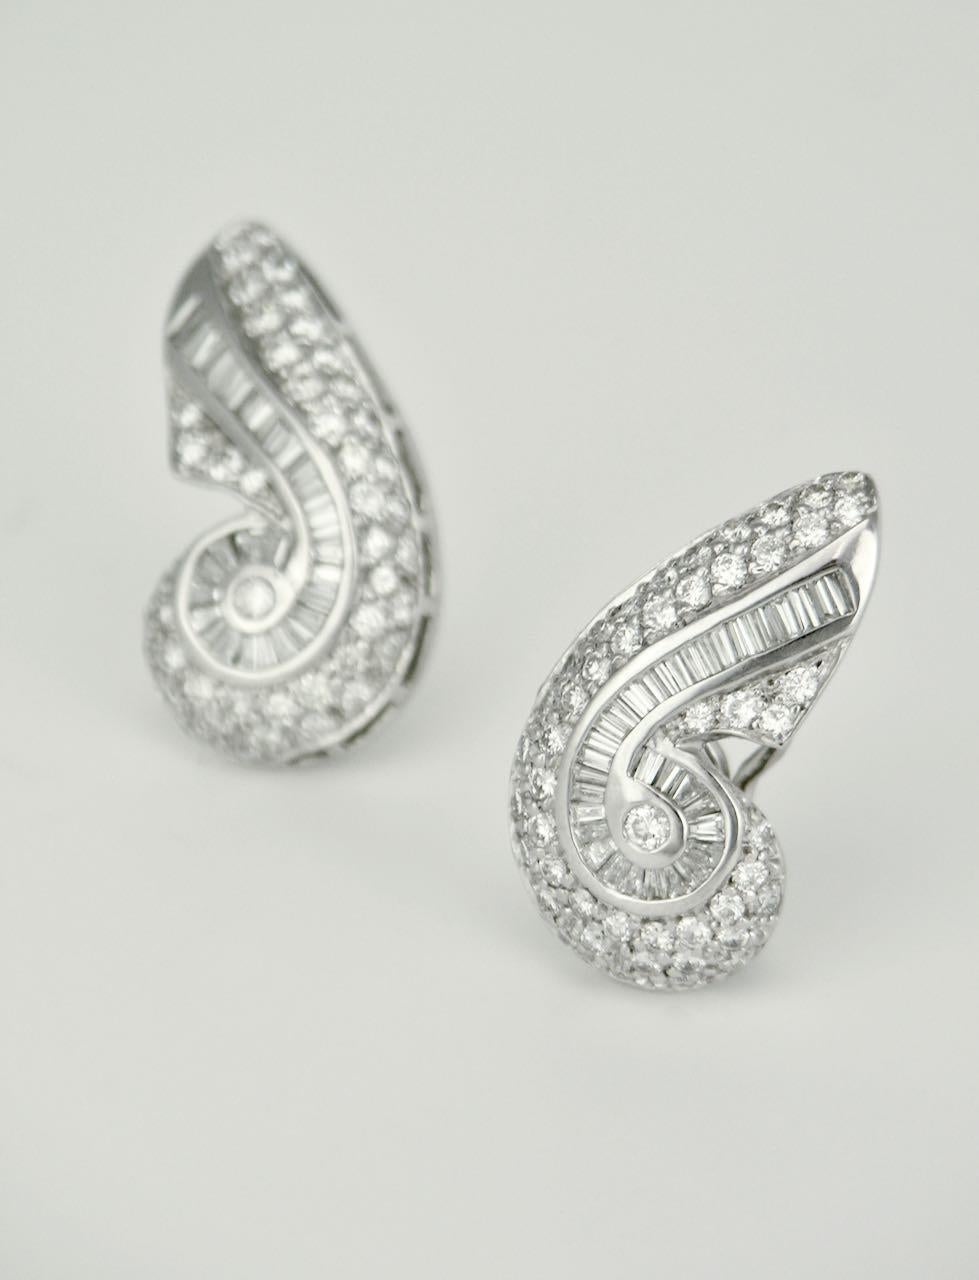 A pair of stunning 18k gold and diamond scroll earrings - each earring consisting of 48 pave set round brilliant cut diamonds set on either side of 35 channel set tapered baguette diamonds in a scroll motif.   The mount has been created in Rhodium